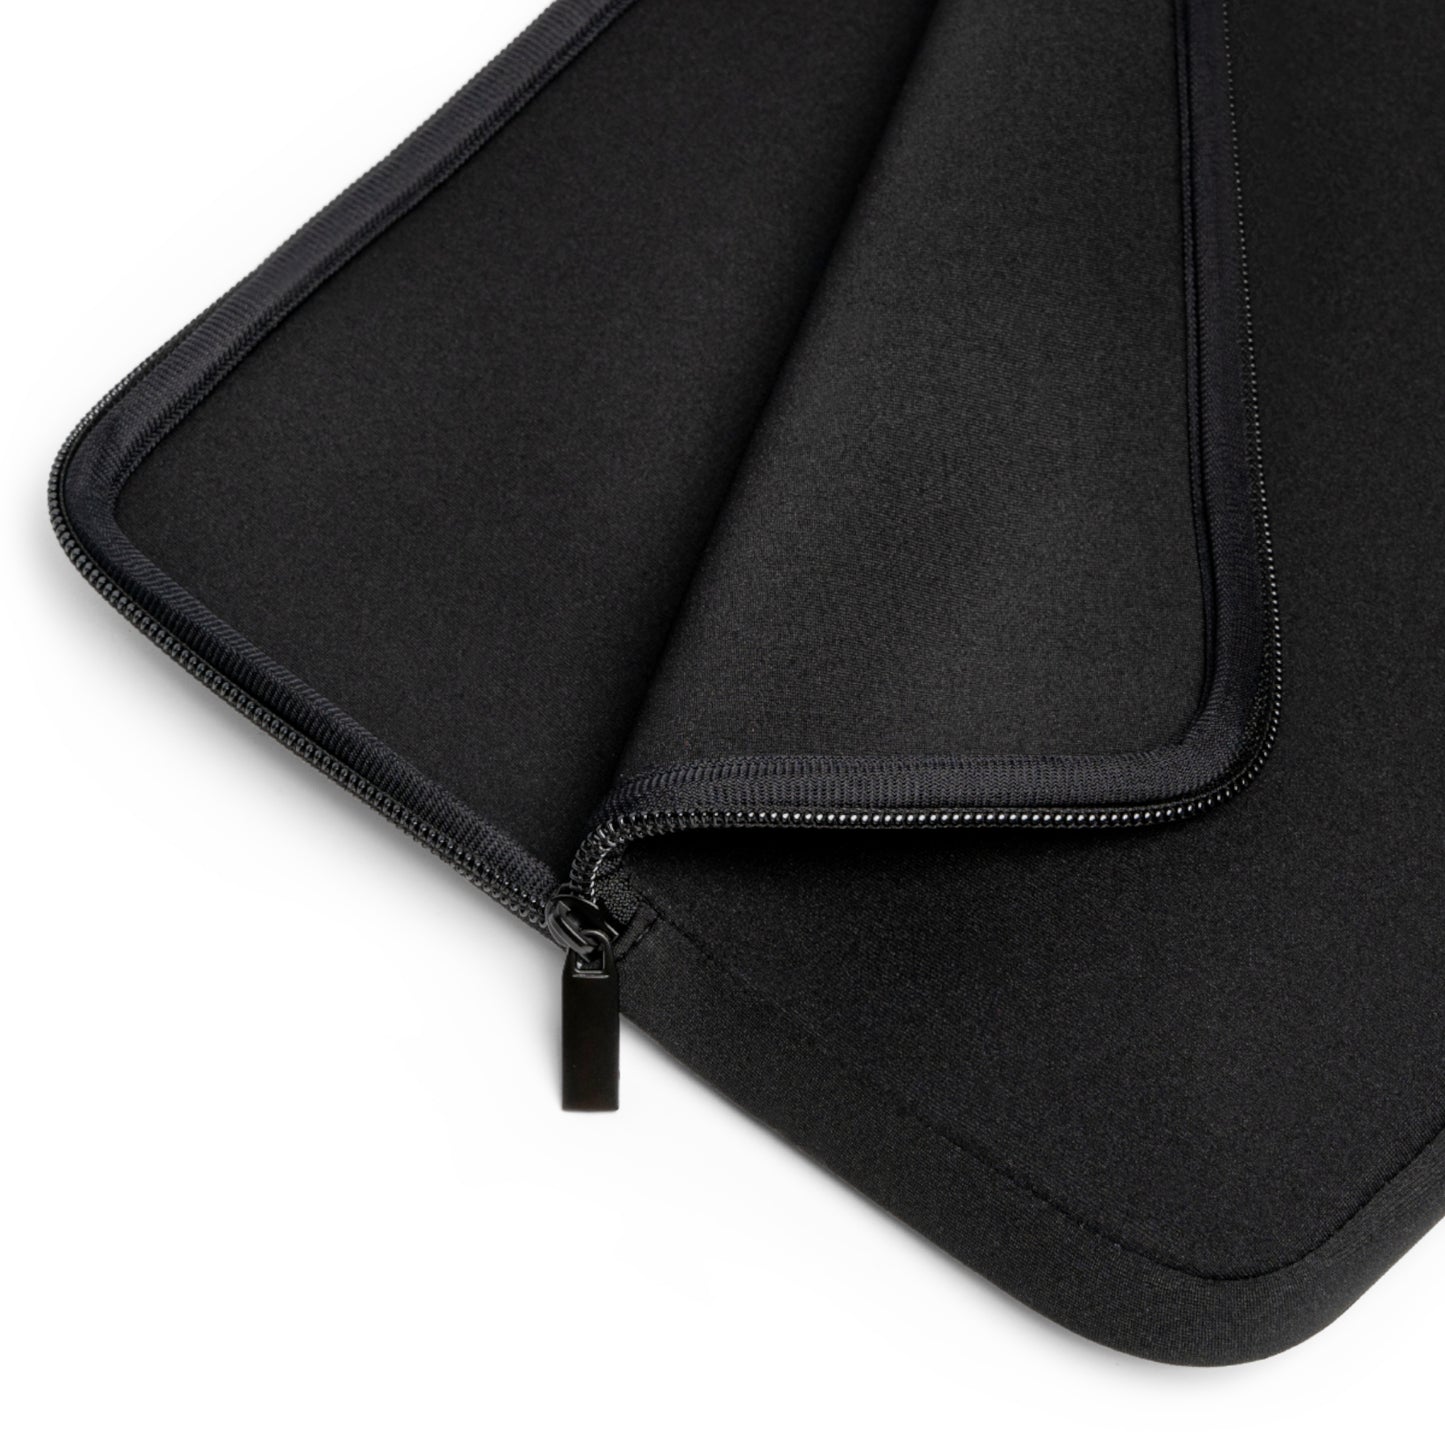 Laptop Sleeve - The Fearless Artist (White on Black)